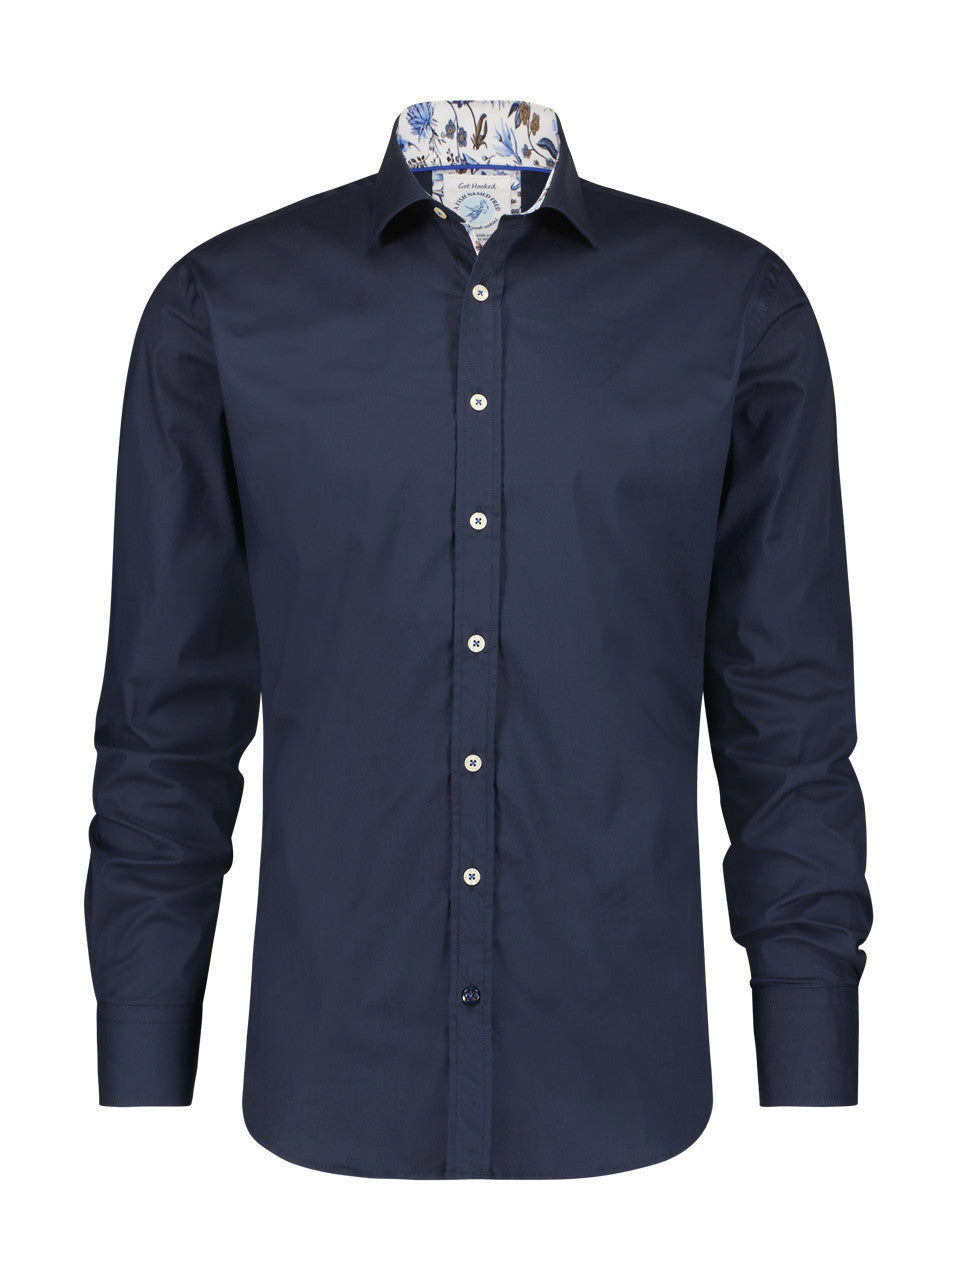 A Fish Named Fred Men's Navy Powerstretch Shirt